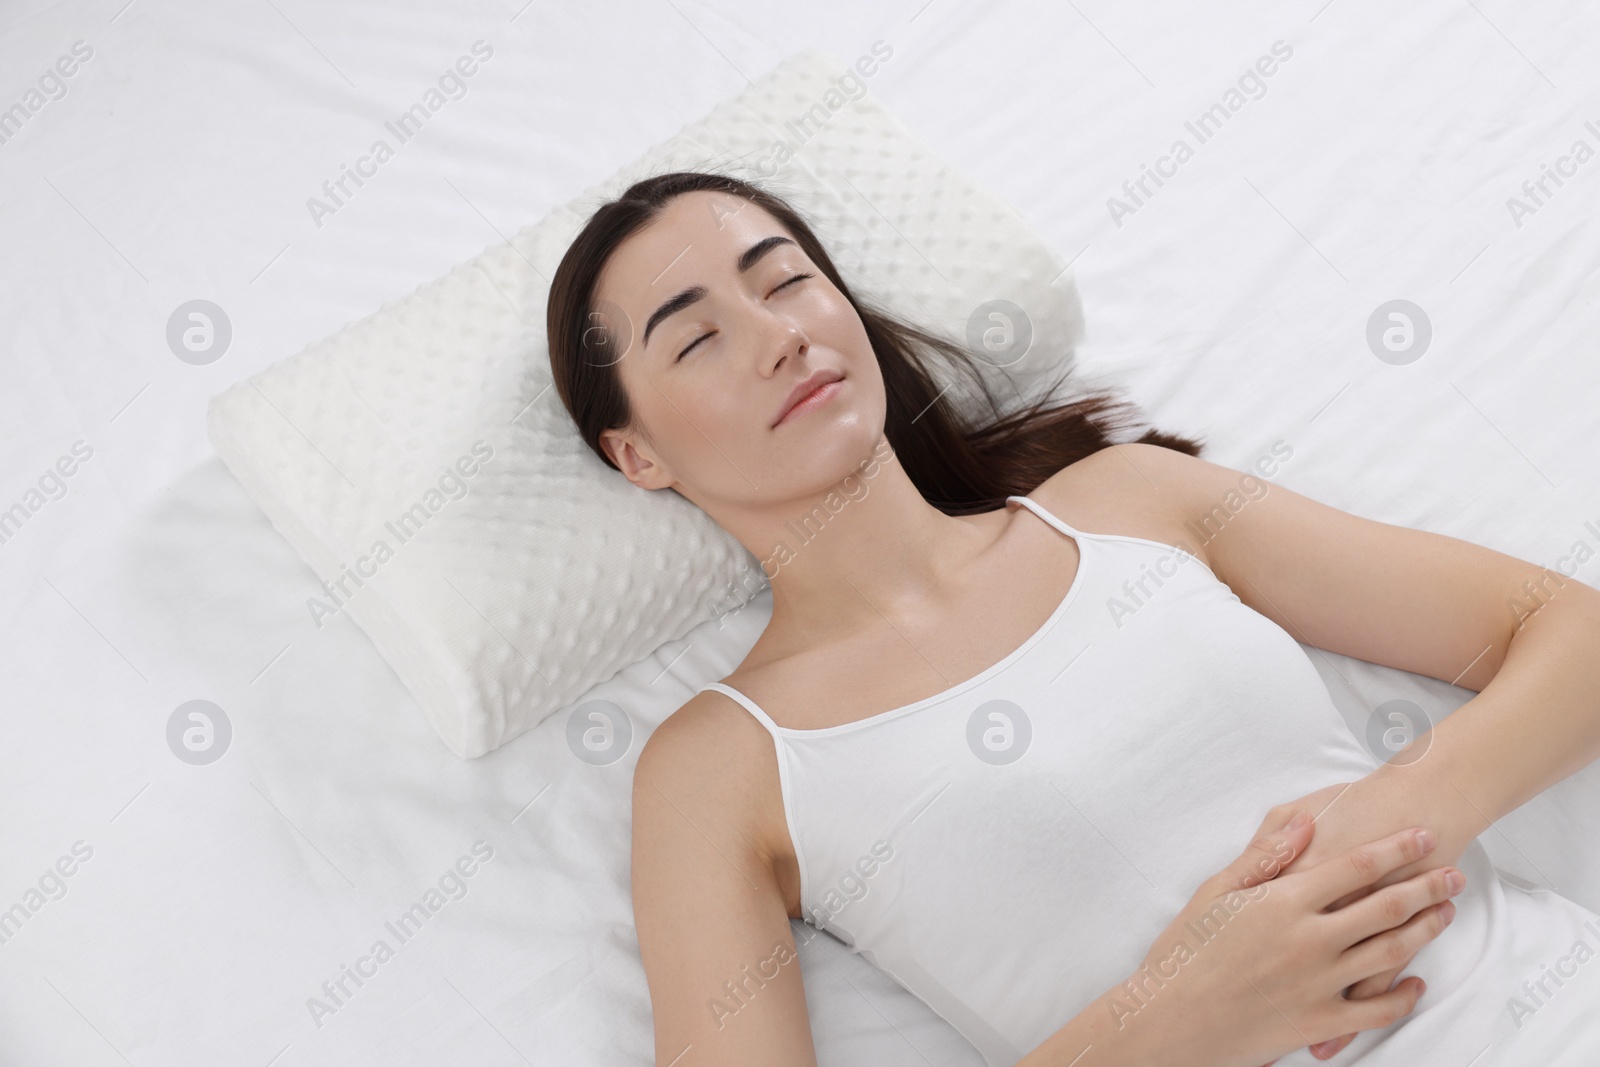 Photo of Woman sleeping on orthopedic pillow in bed